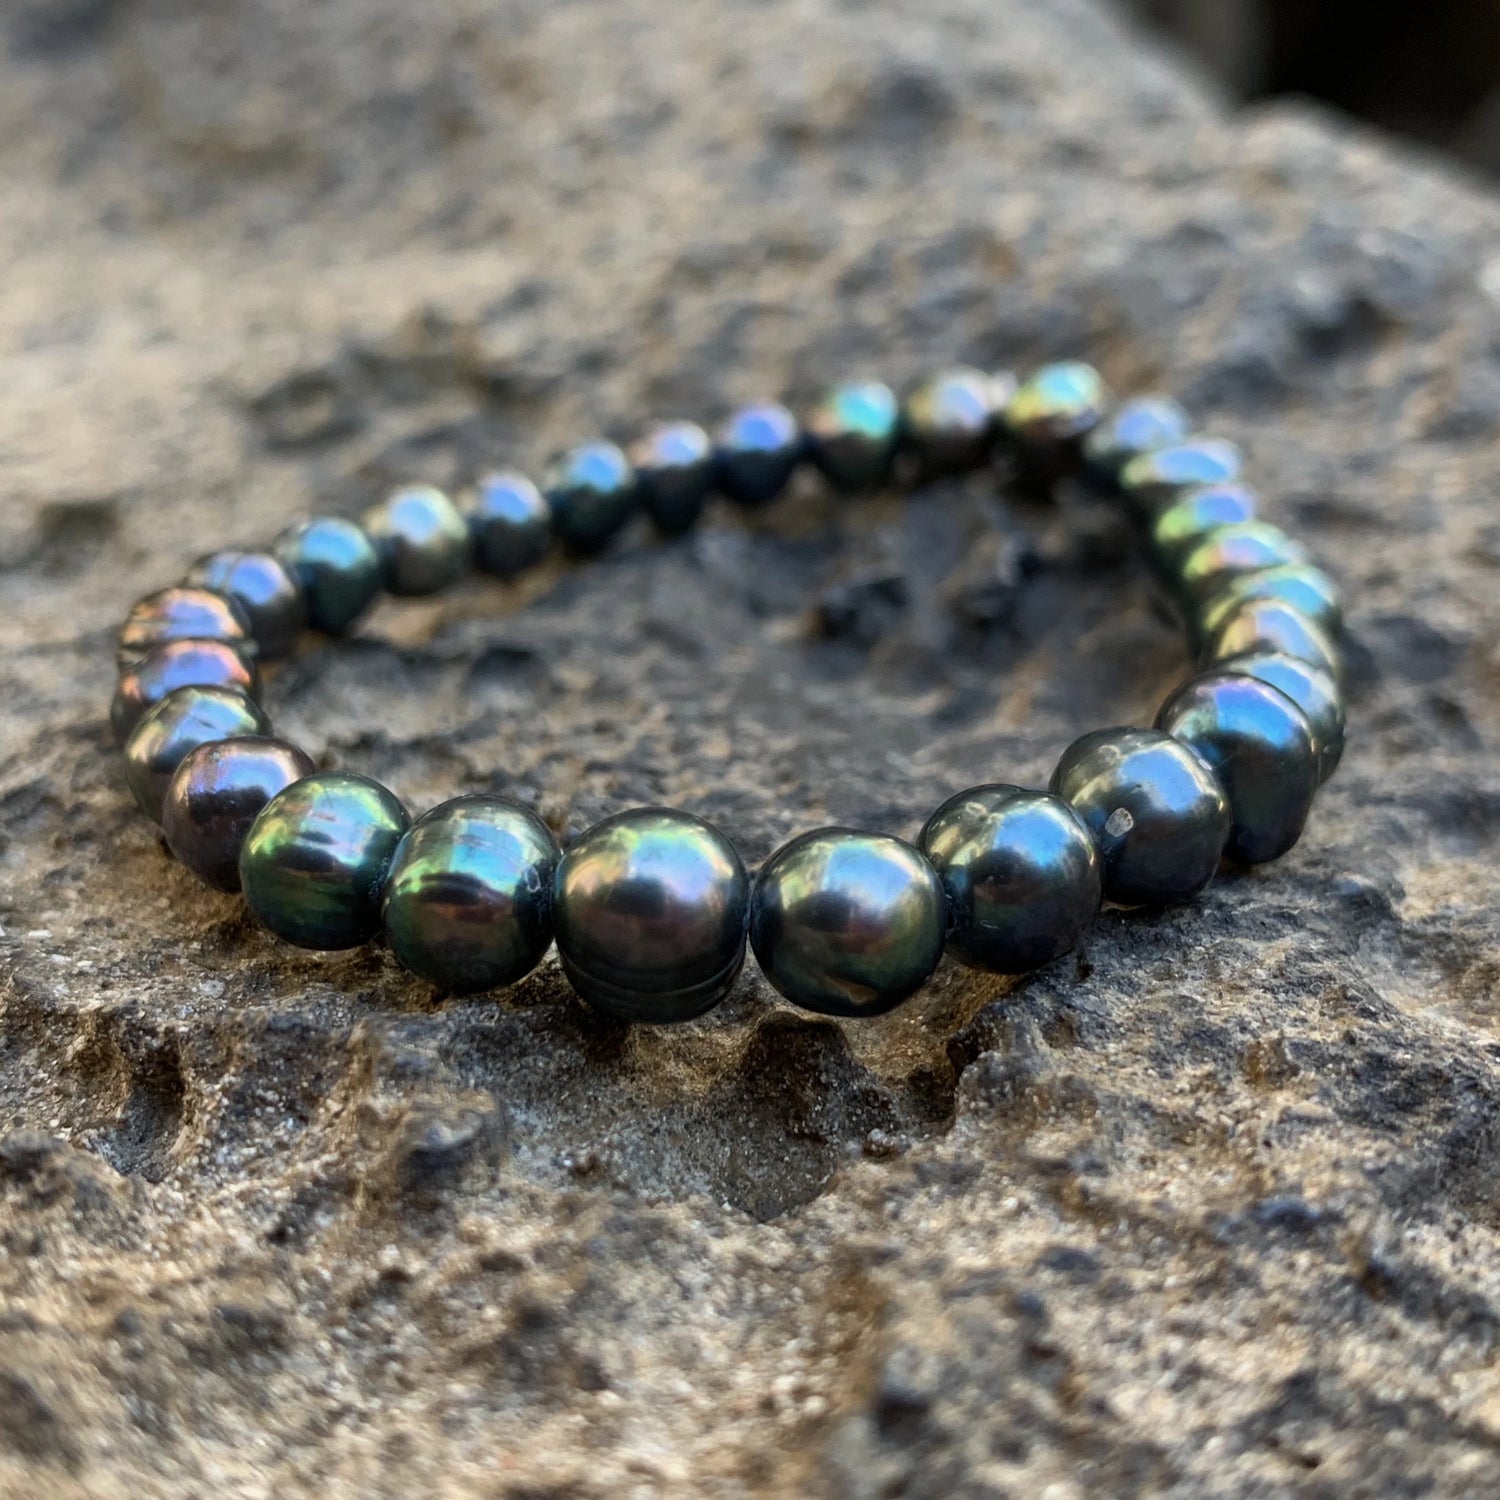 Freshwater Pearl Bracelet and 2 Black Diamond Beads in Oxidized Sterli–  Blacy's Vault